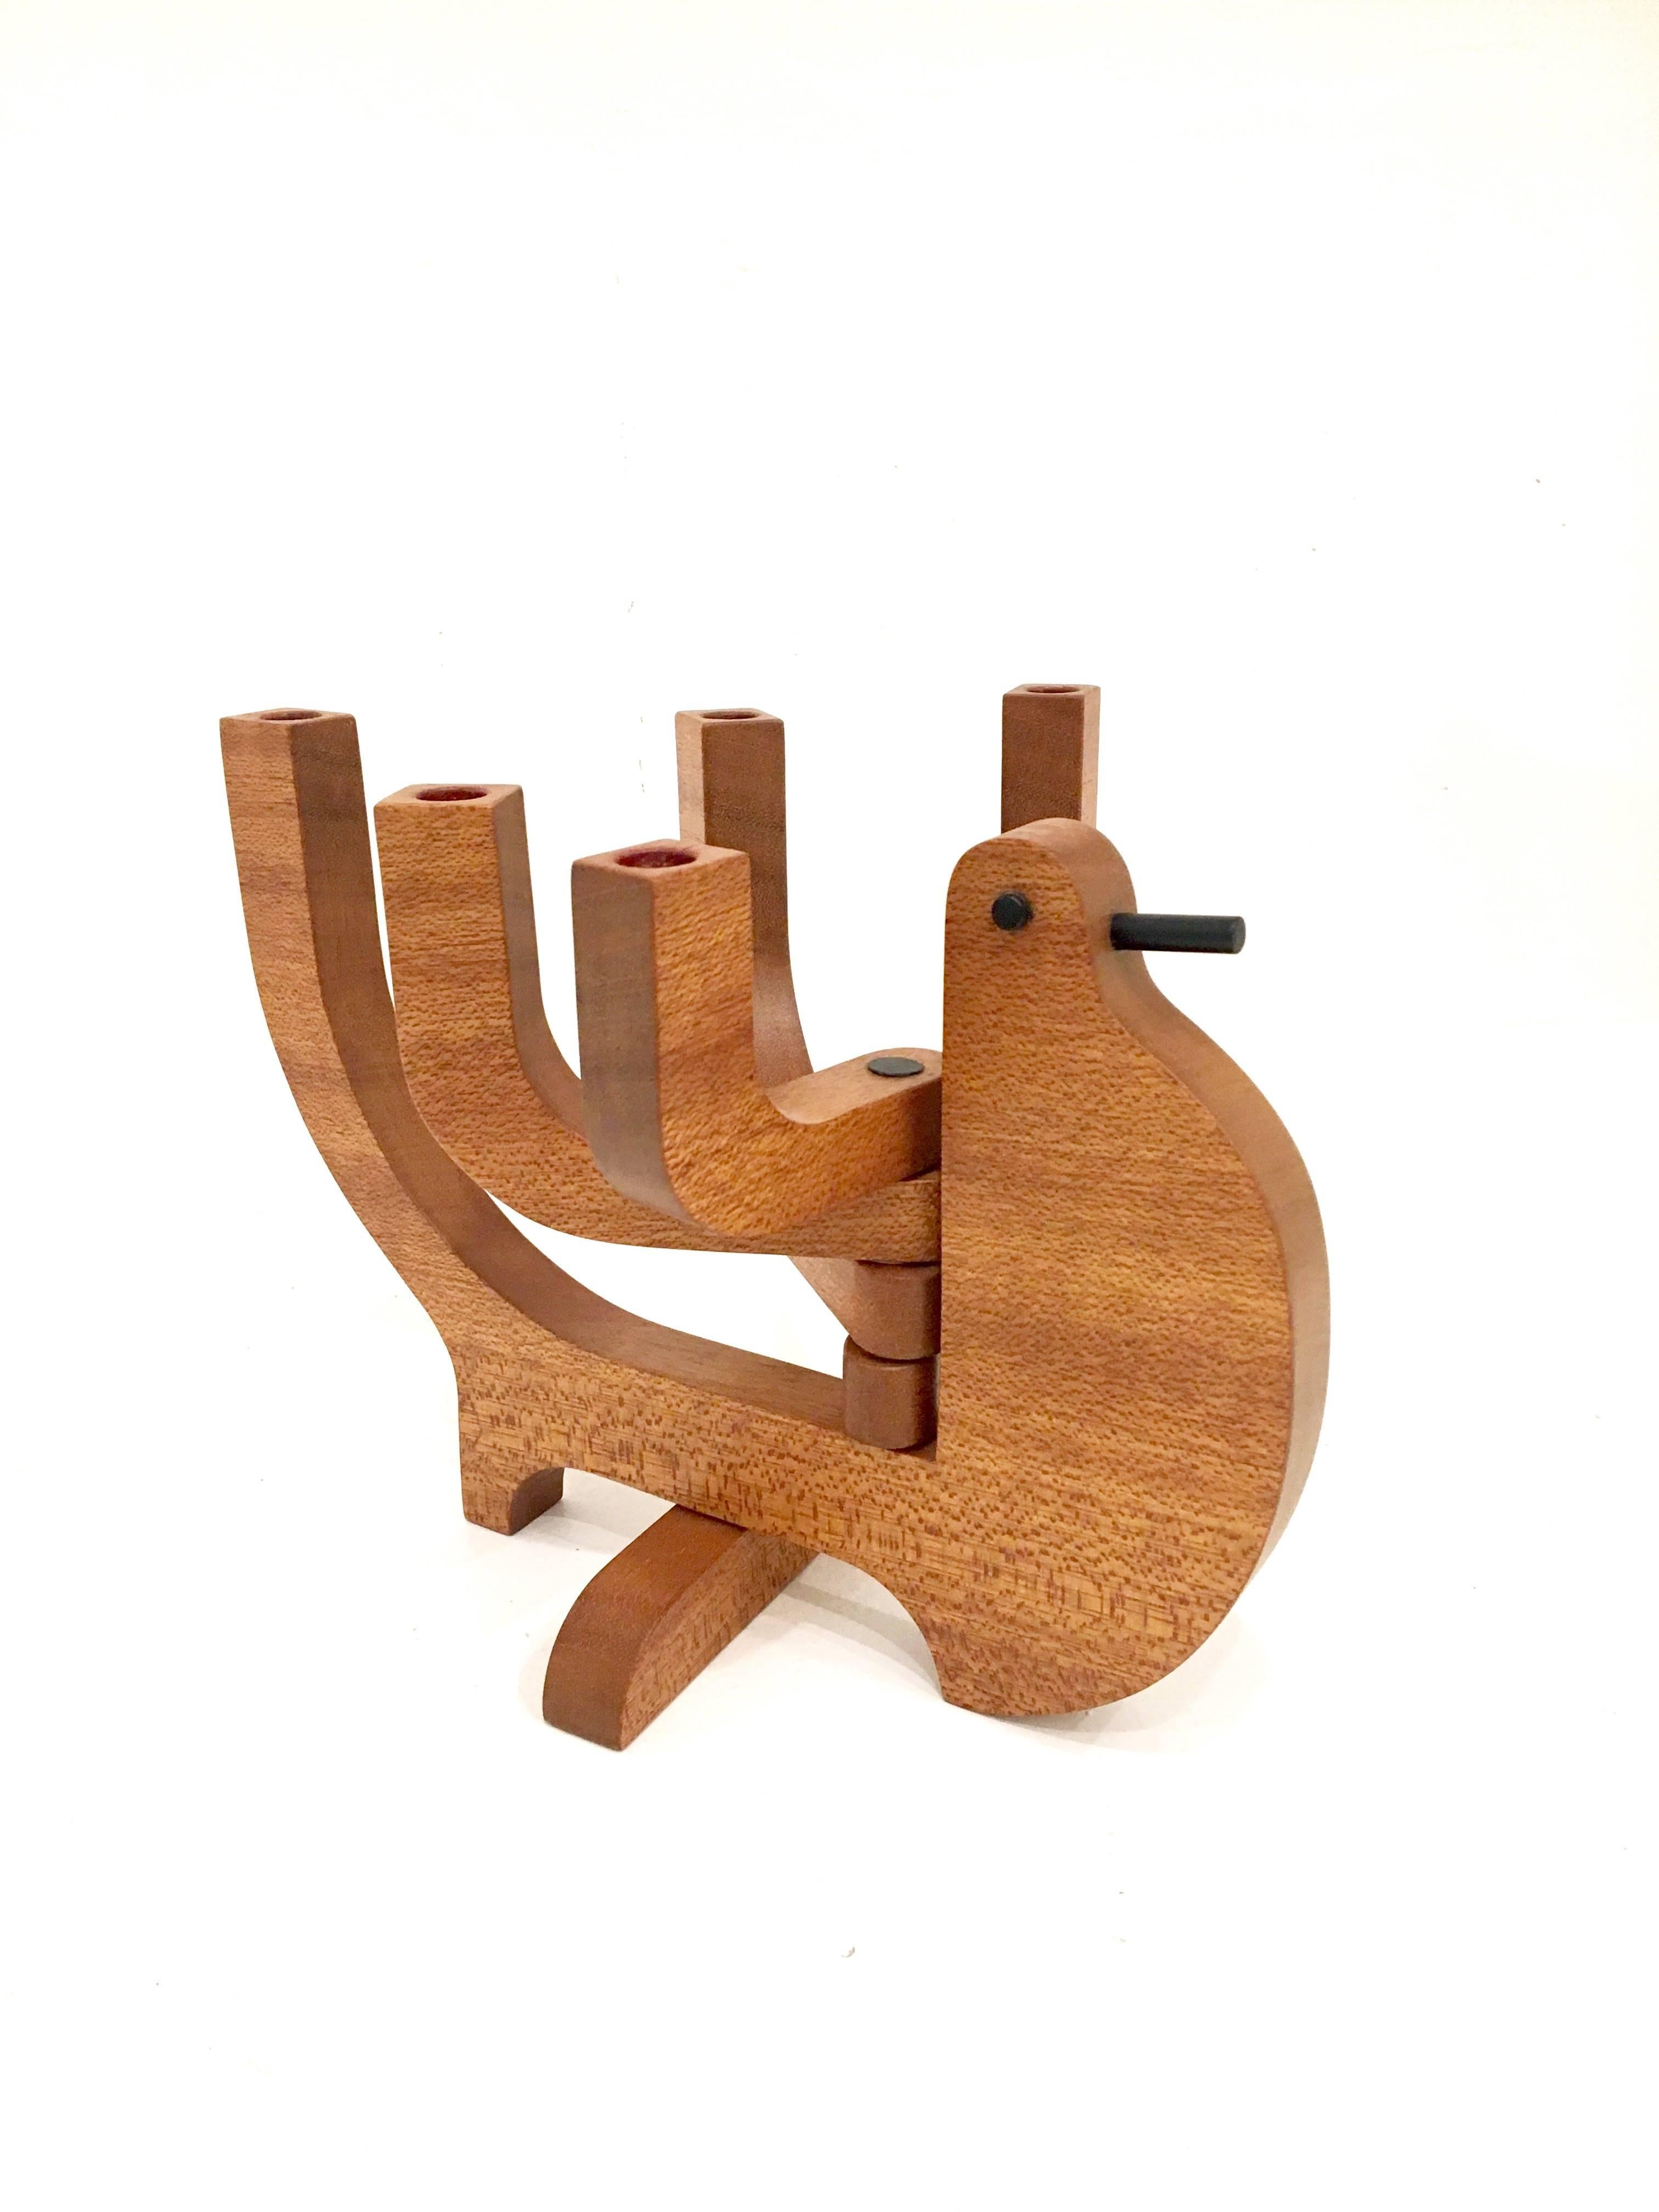 Whimsical versatile multiposition candleholder, solid teak five candle capacity 1/2" diameter candles well done piece.